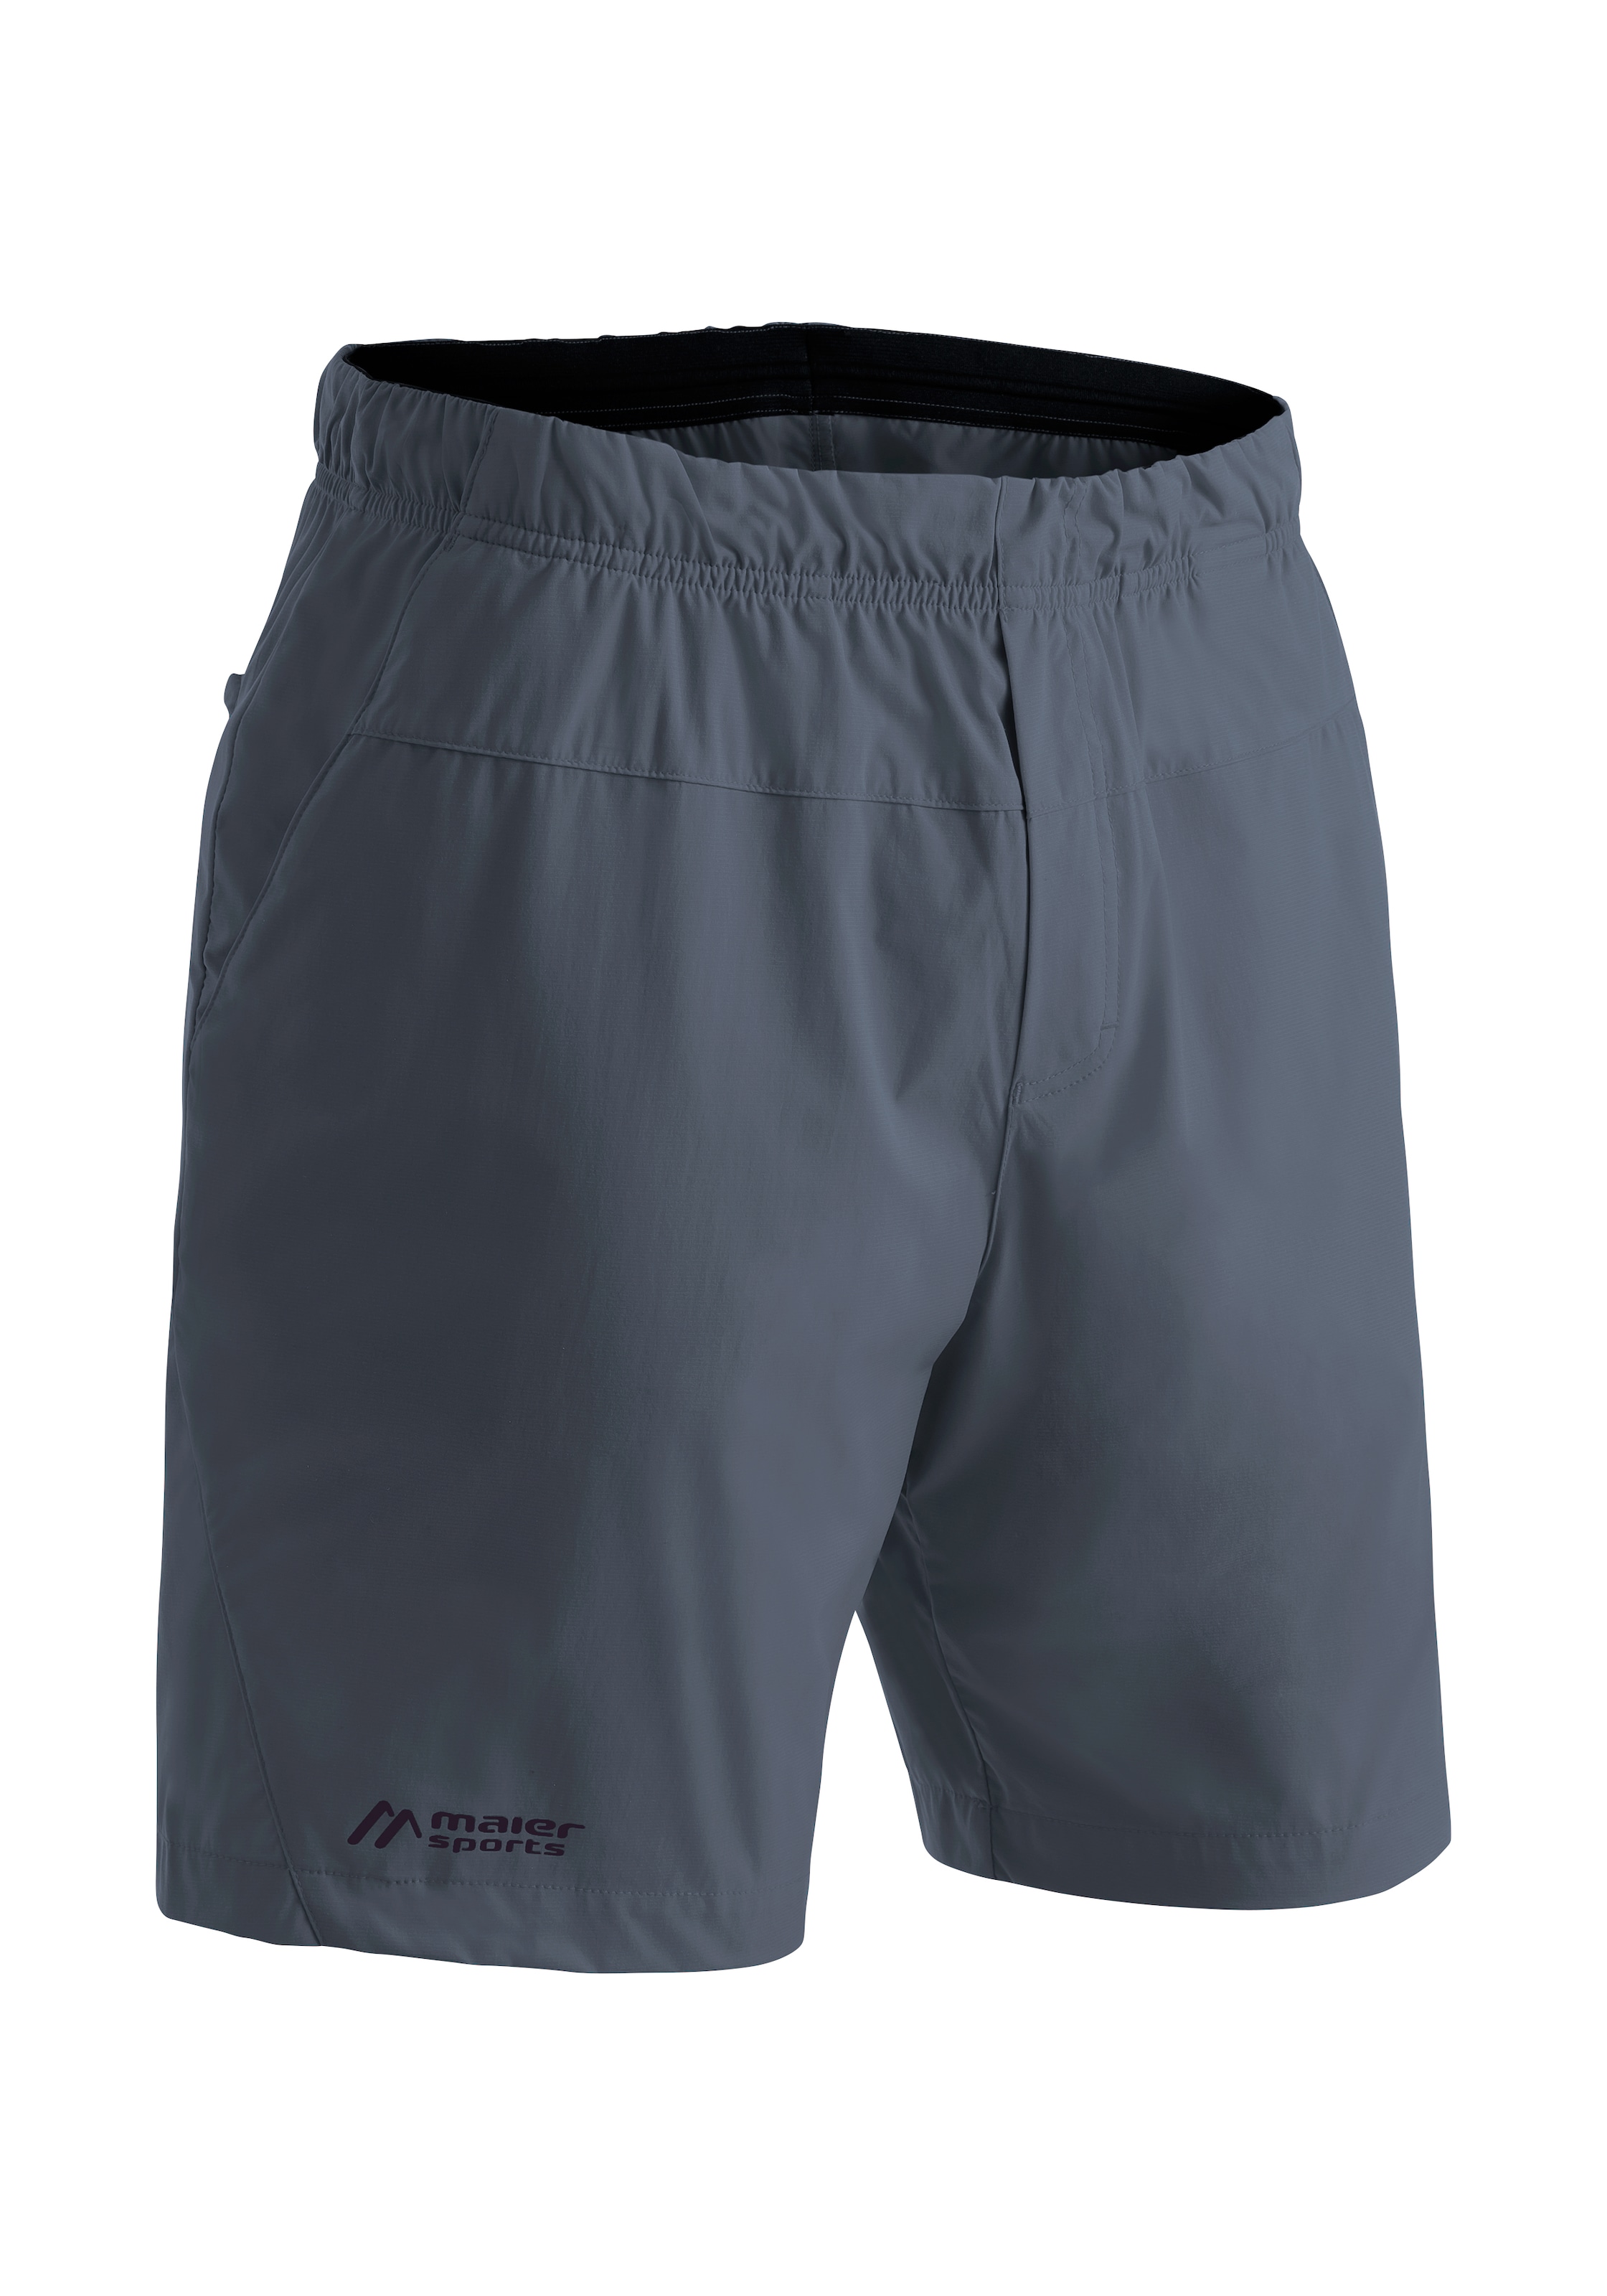 Maier Sports Funktionsshorts »Fortunit Short M« Rob...